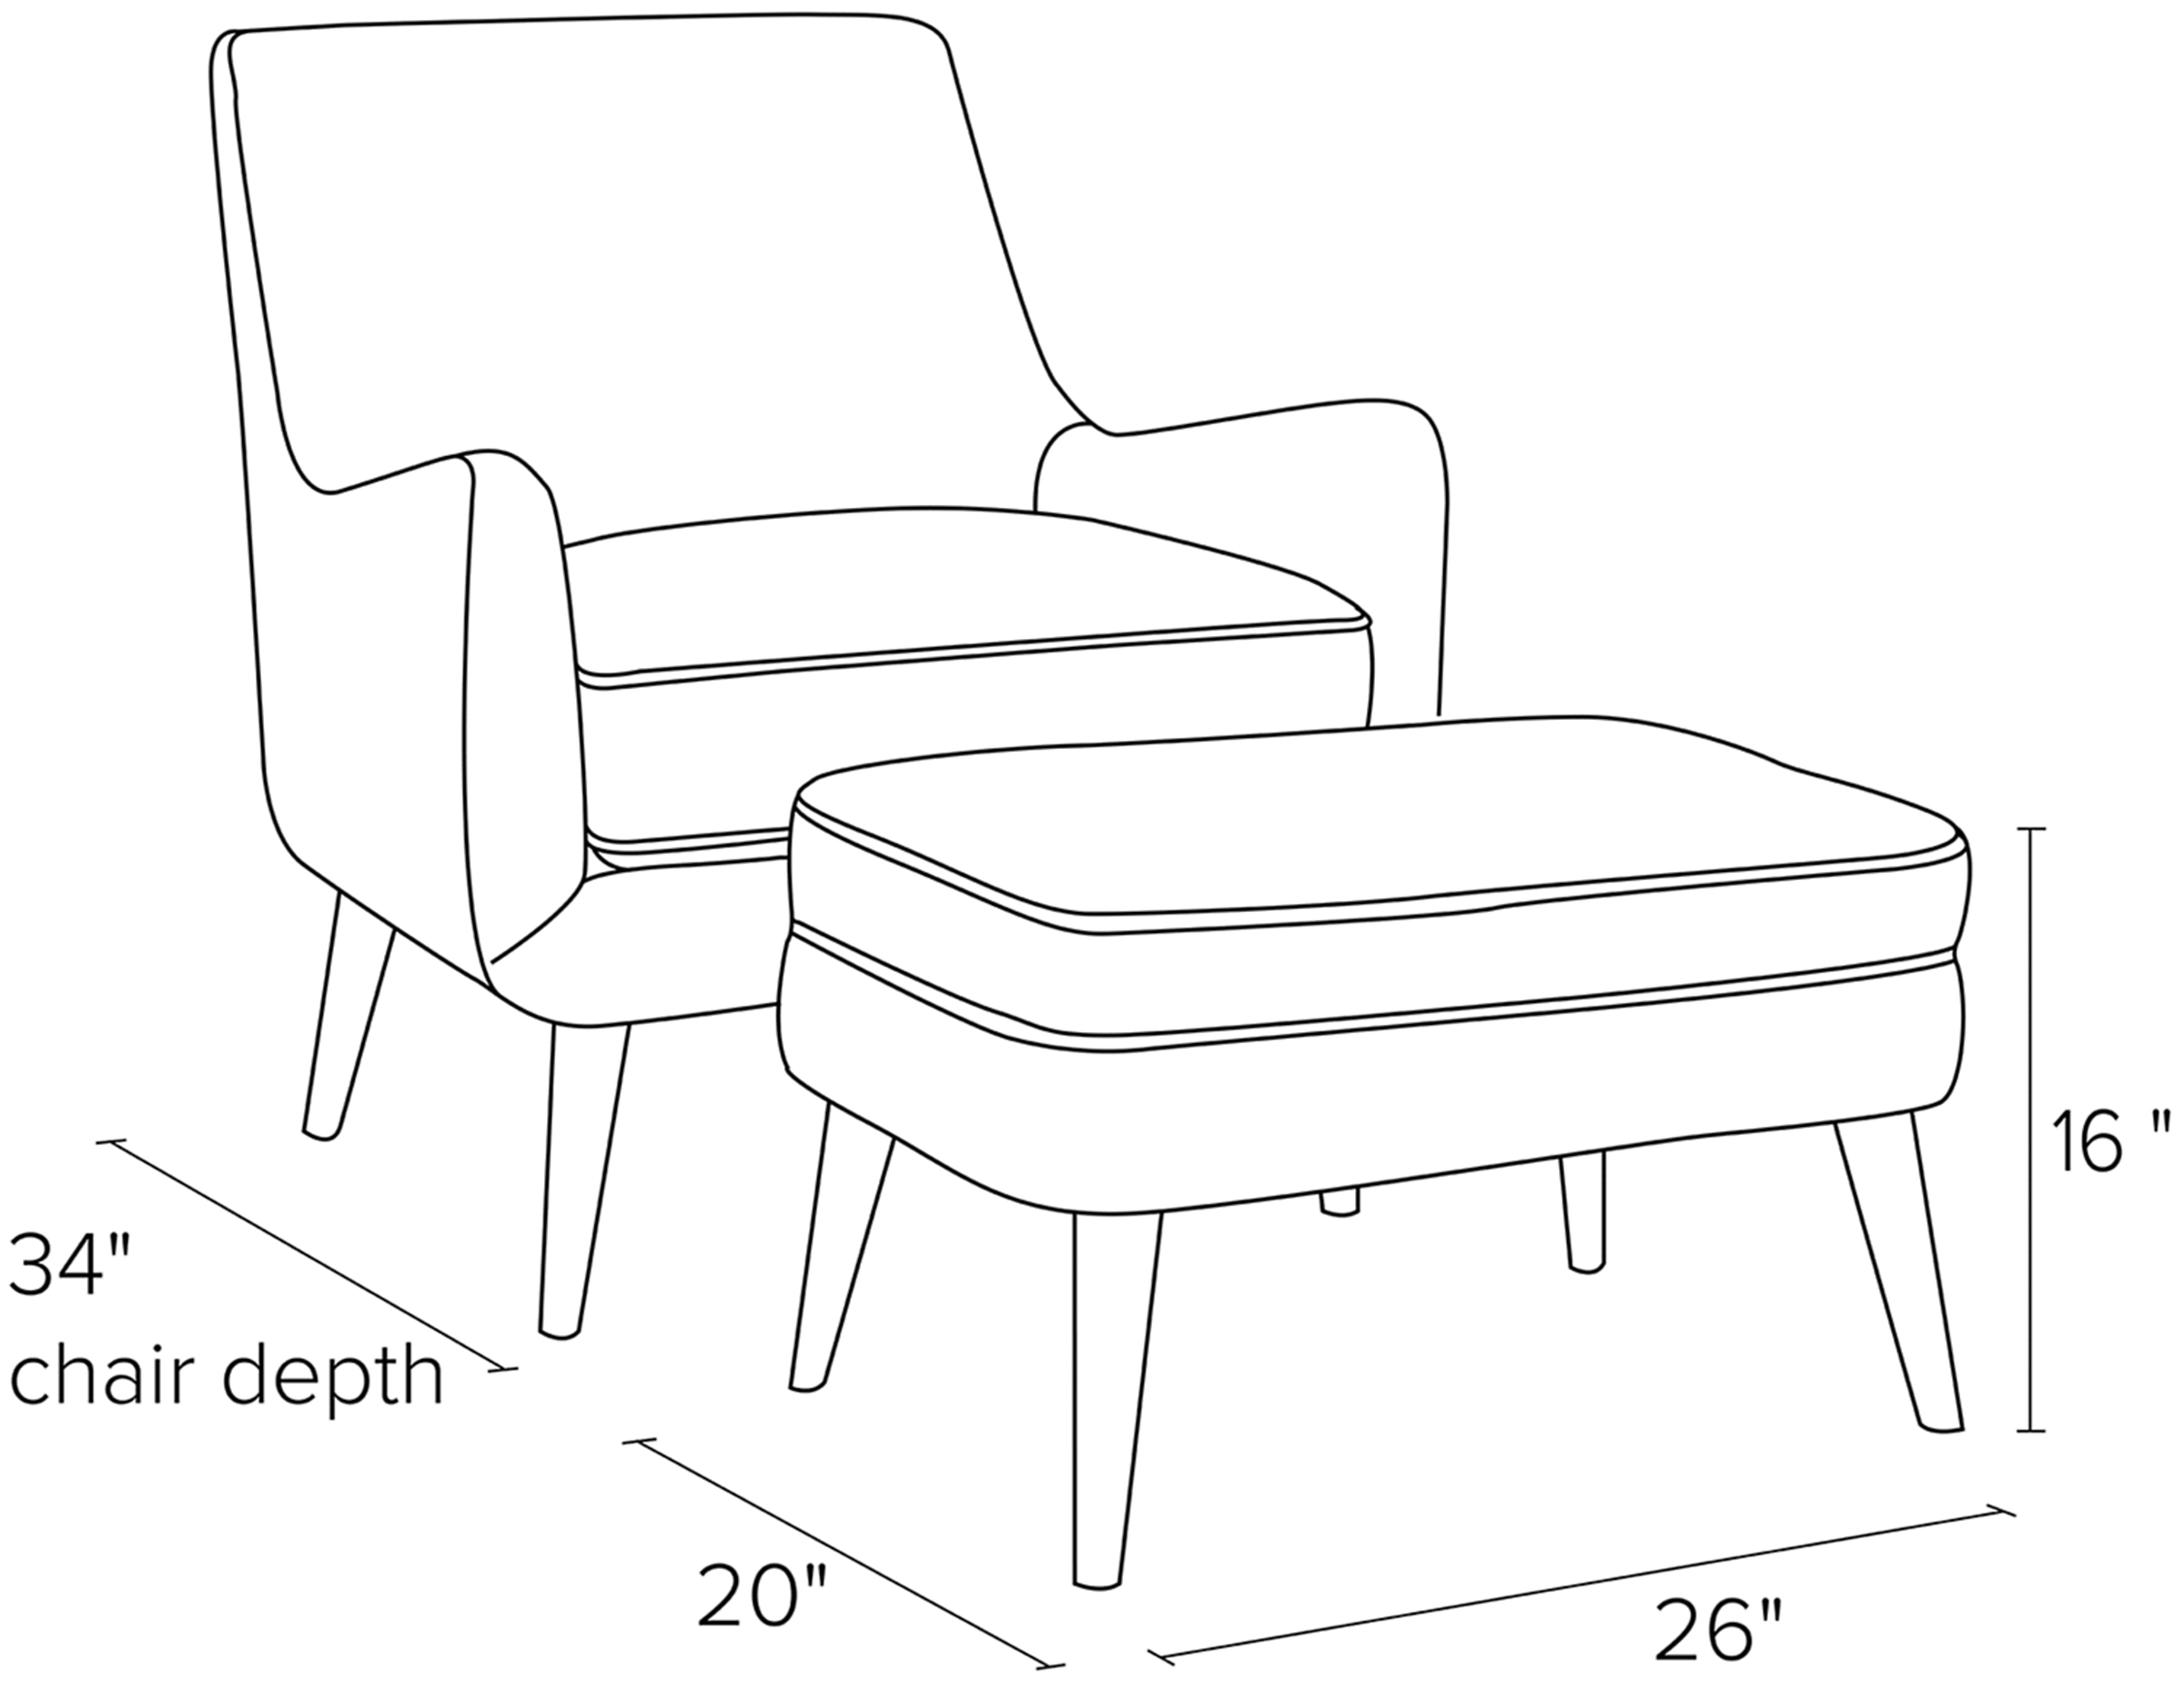 Side view dimension illustration of Quinn chair and ottoman.